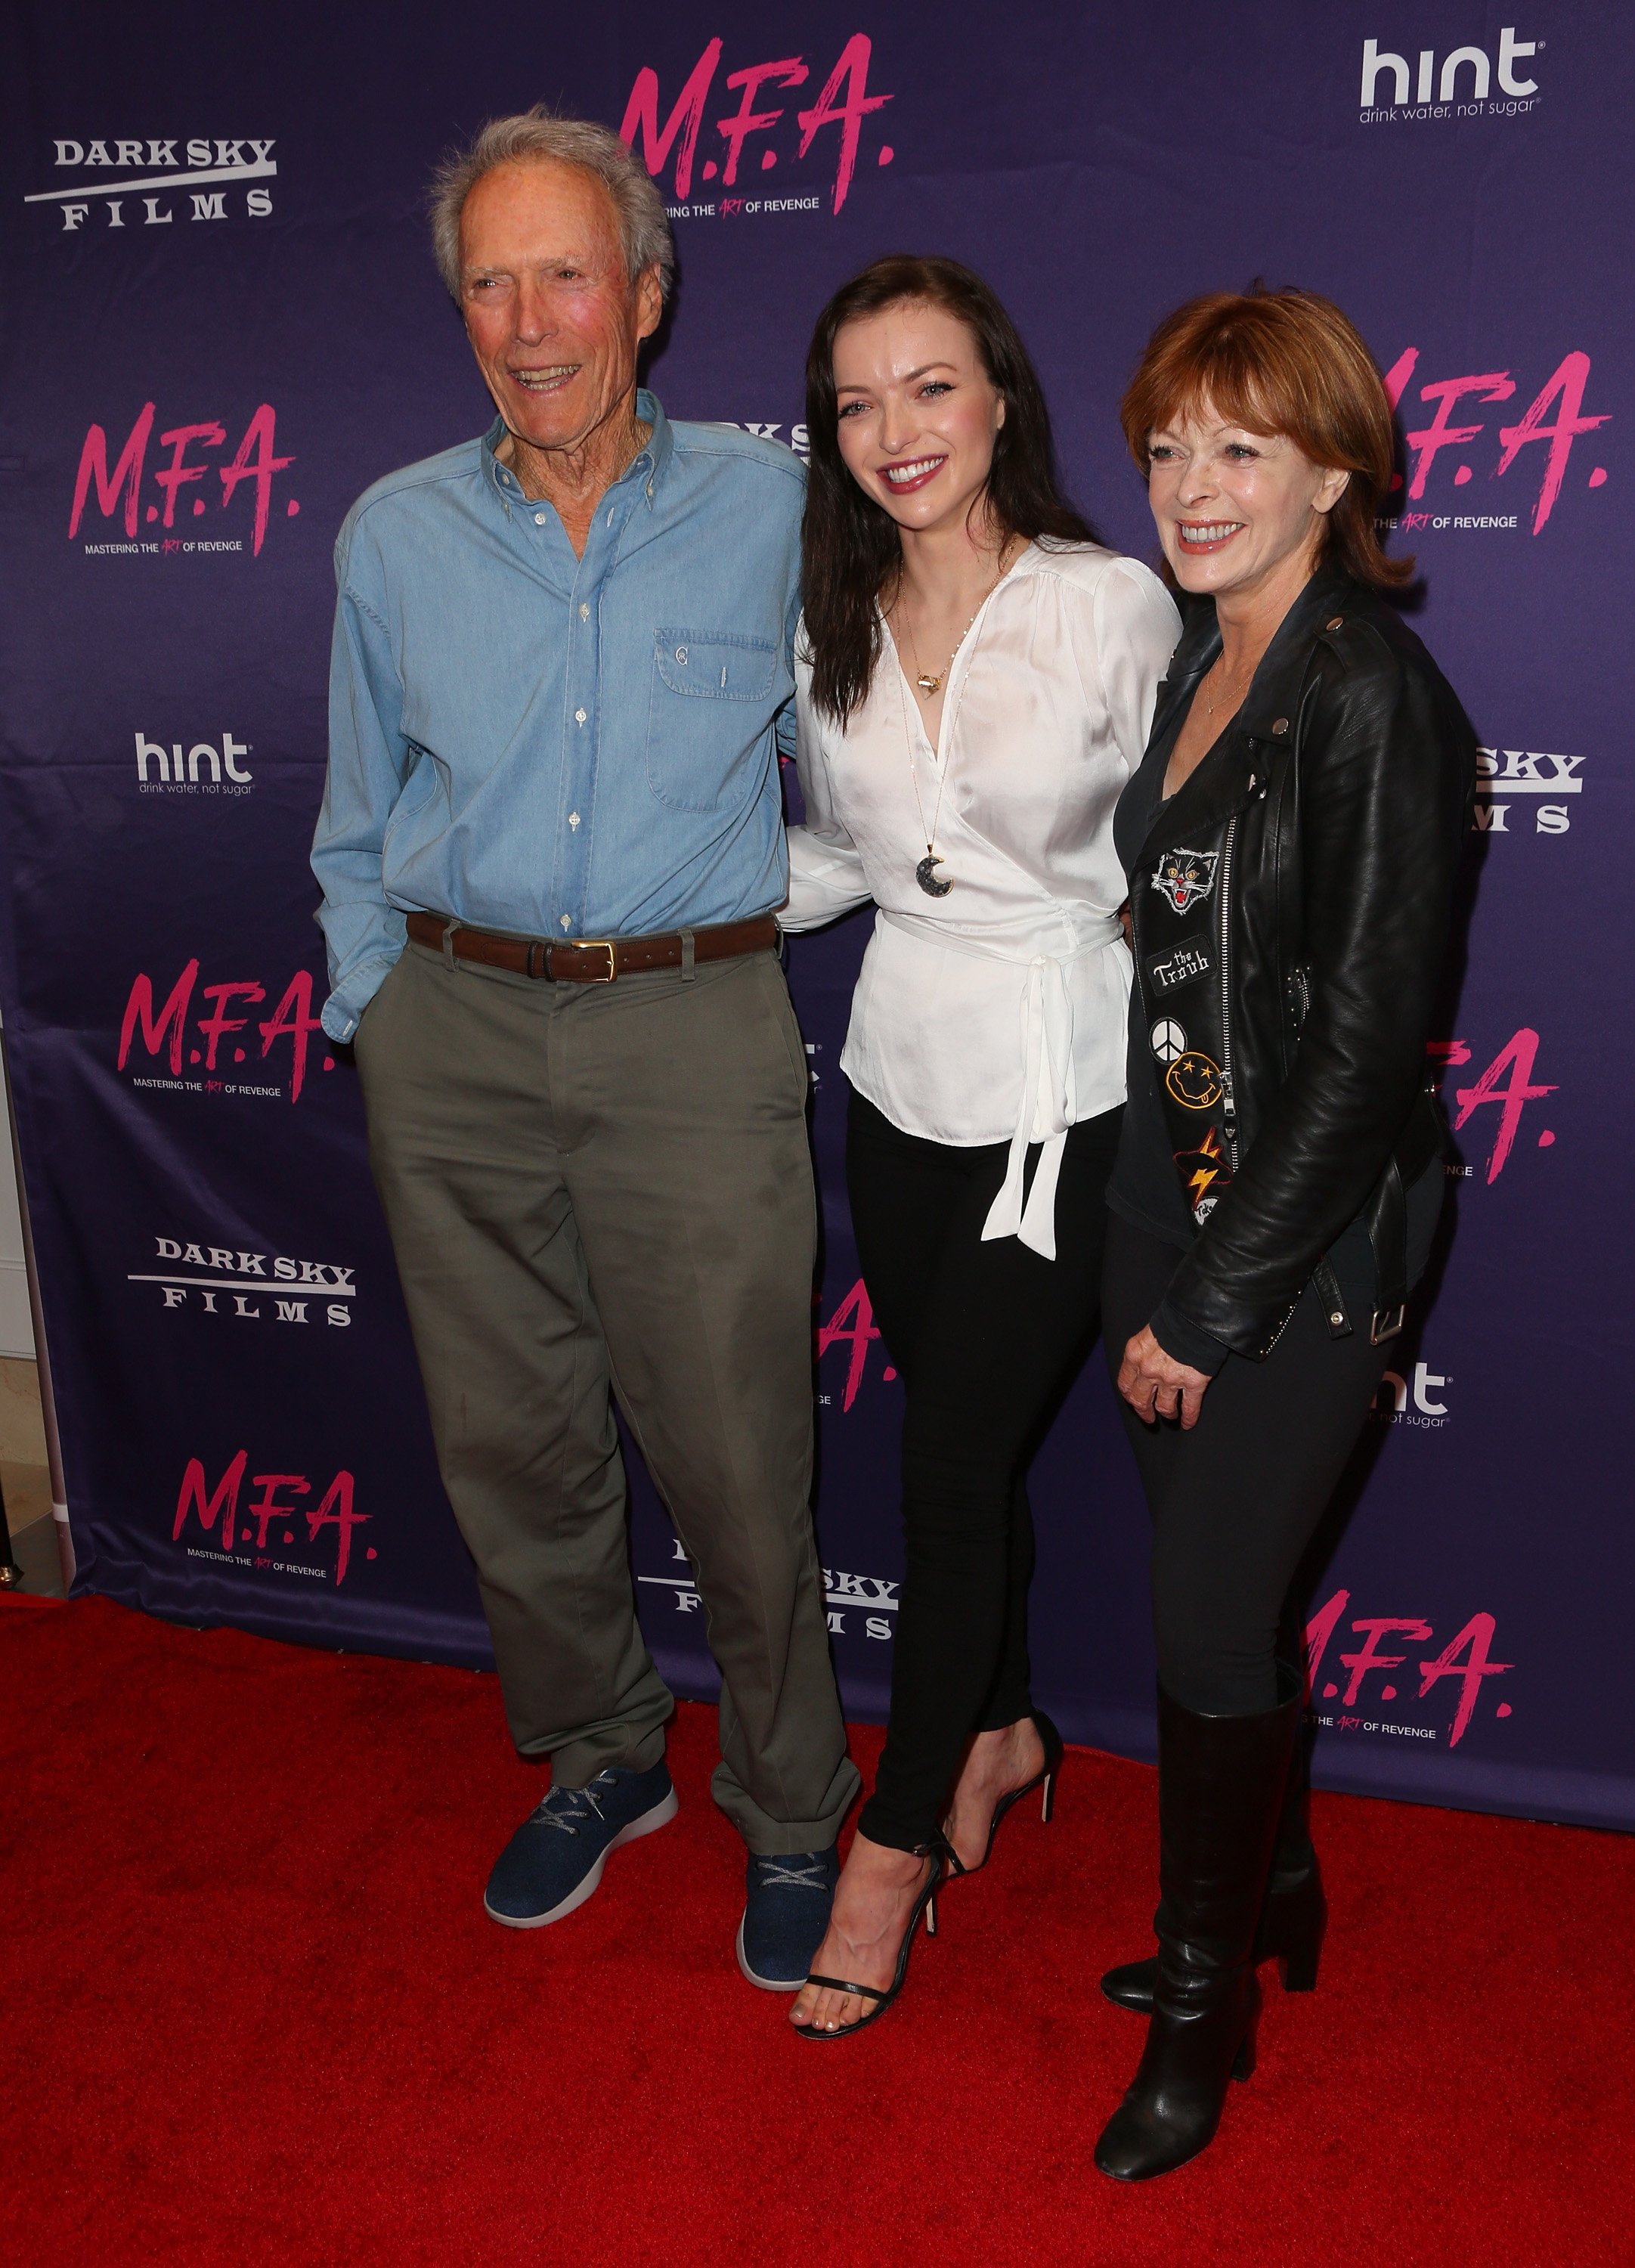 Francesca Eastwood with her father, Clint Eastwood, and her mother, Frances Fisher at the premiere on Francesca's movie, "M.F.A.", October 2017. | Photo: Getty Images. 